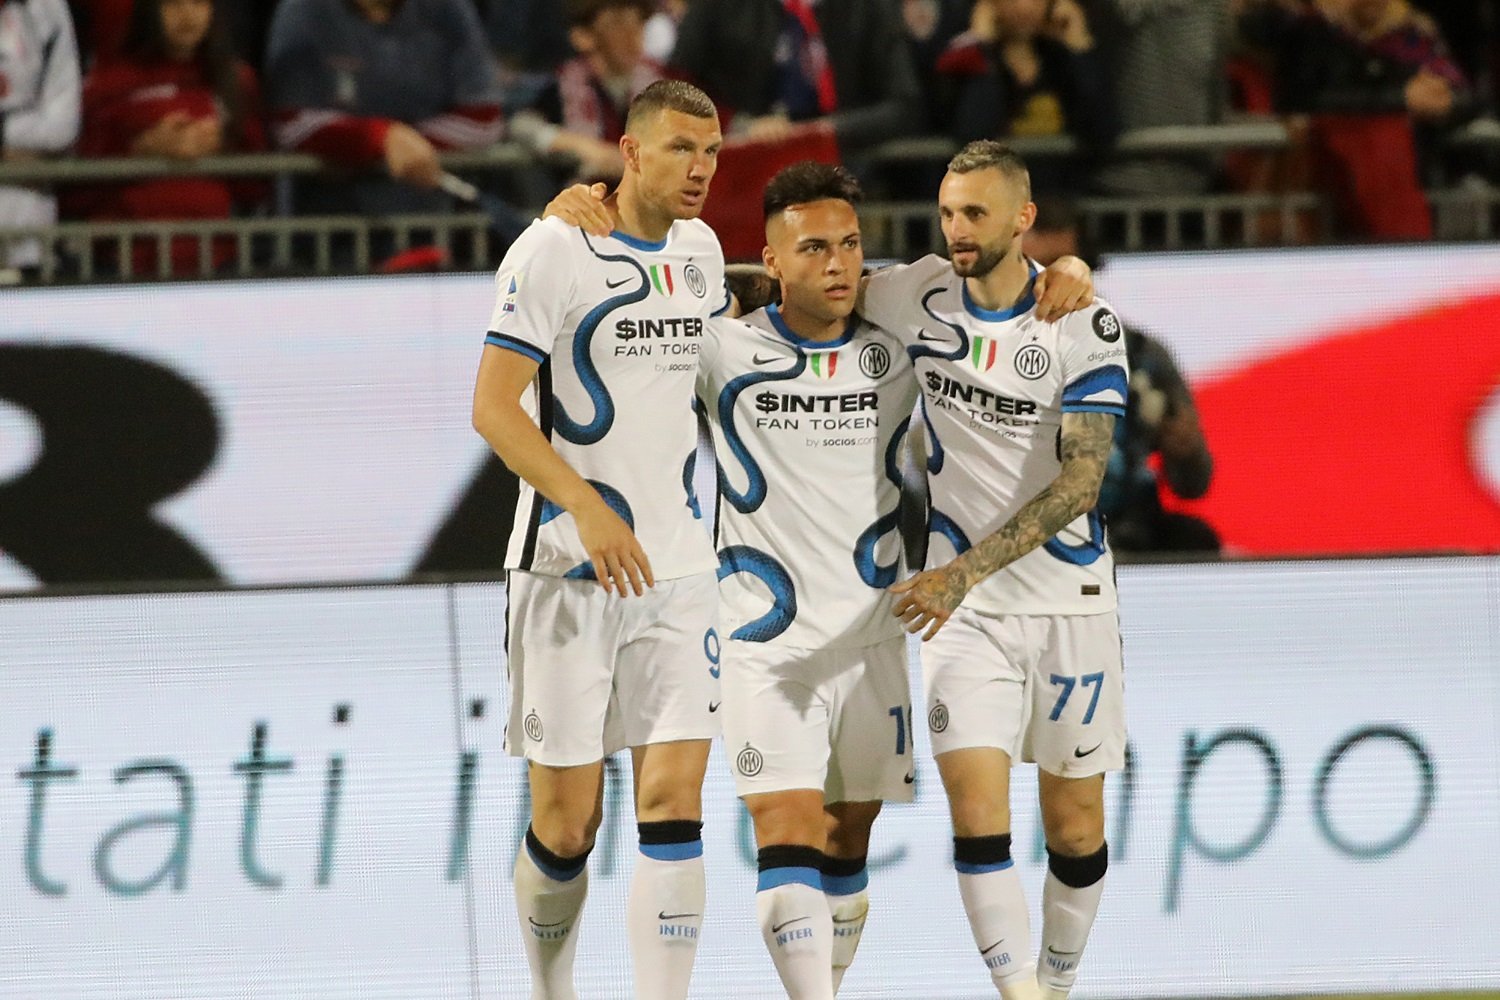 Serie A: Inter Milan beat Cagliari 3-1 as the Serie A title race will be decided on the FINAL DAY, Lautaro Martinez scores a brace, Watch Inter Milan beat Cagliari HIGHLIGHTS